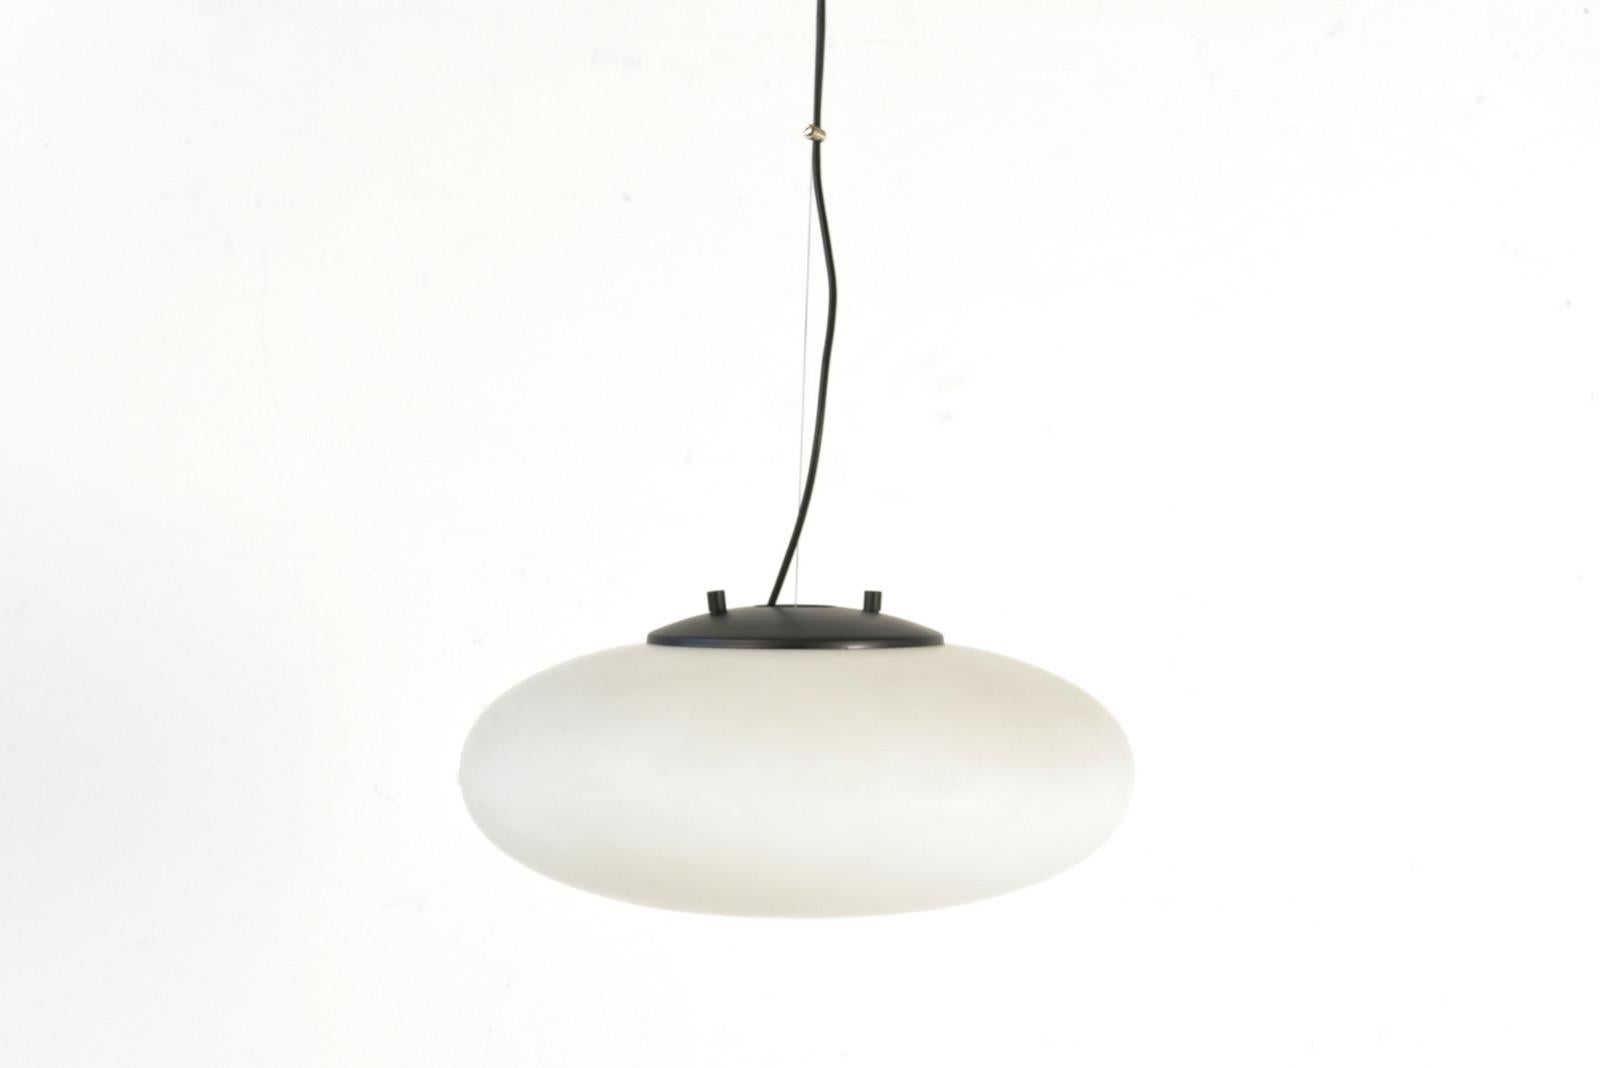 1 of 2 Pendant Lamps by Stilnovo, Italy - 1960s  For Sale 2